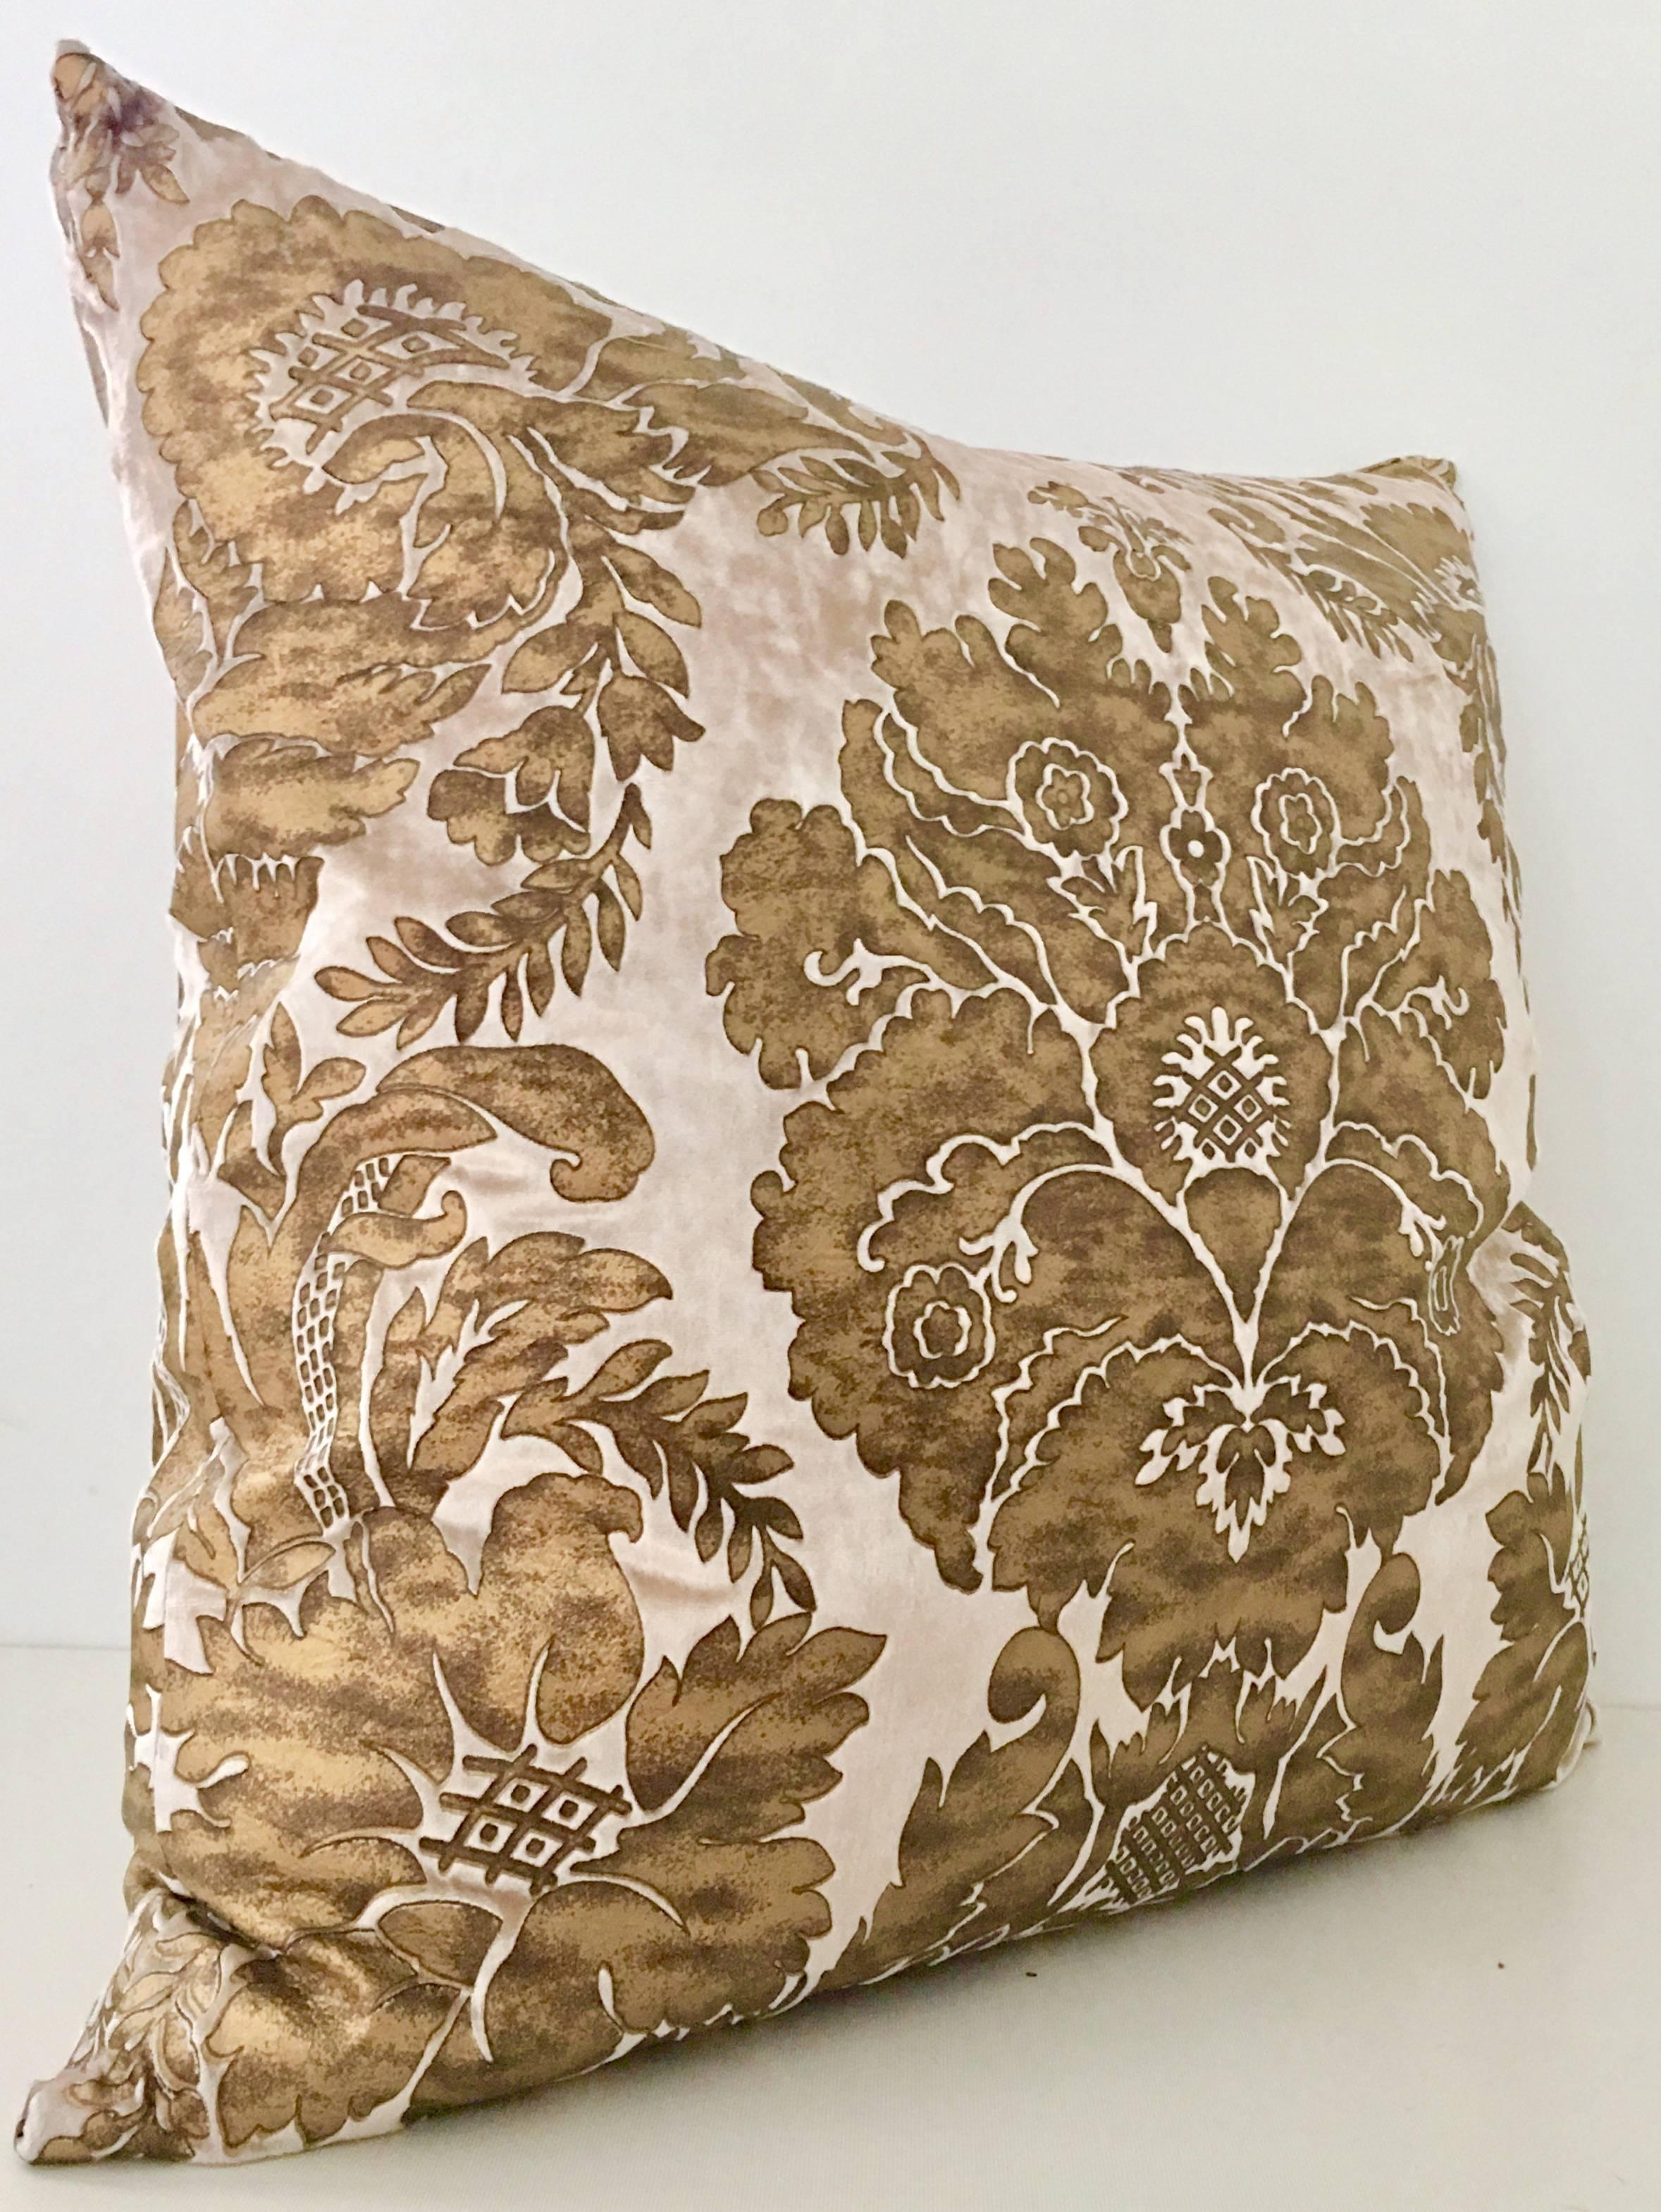 Pair of contemporary down filled 22" inch square pillows. Shimmering copper over taupe cut velvet damask pillow. Insert is down/feather combination with a hidden zipper for easy removal. Dry clean only. Original manufacturer tag intact,